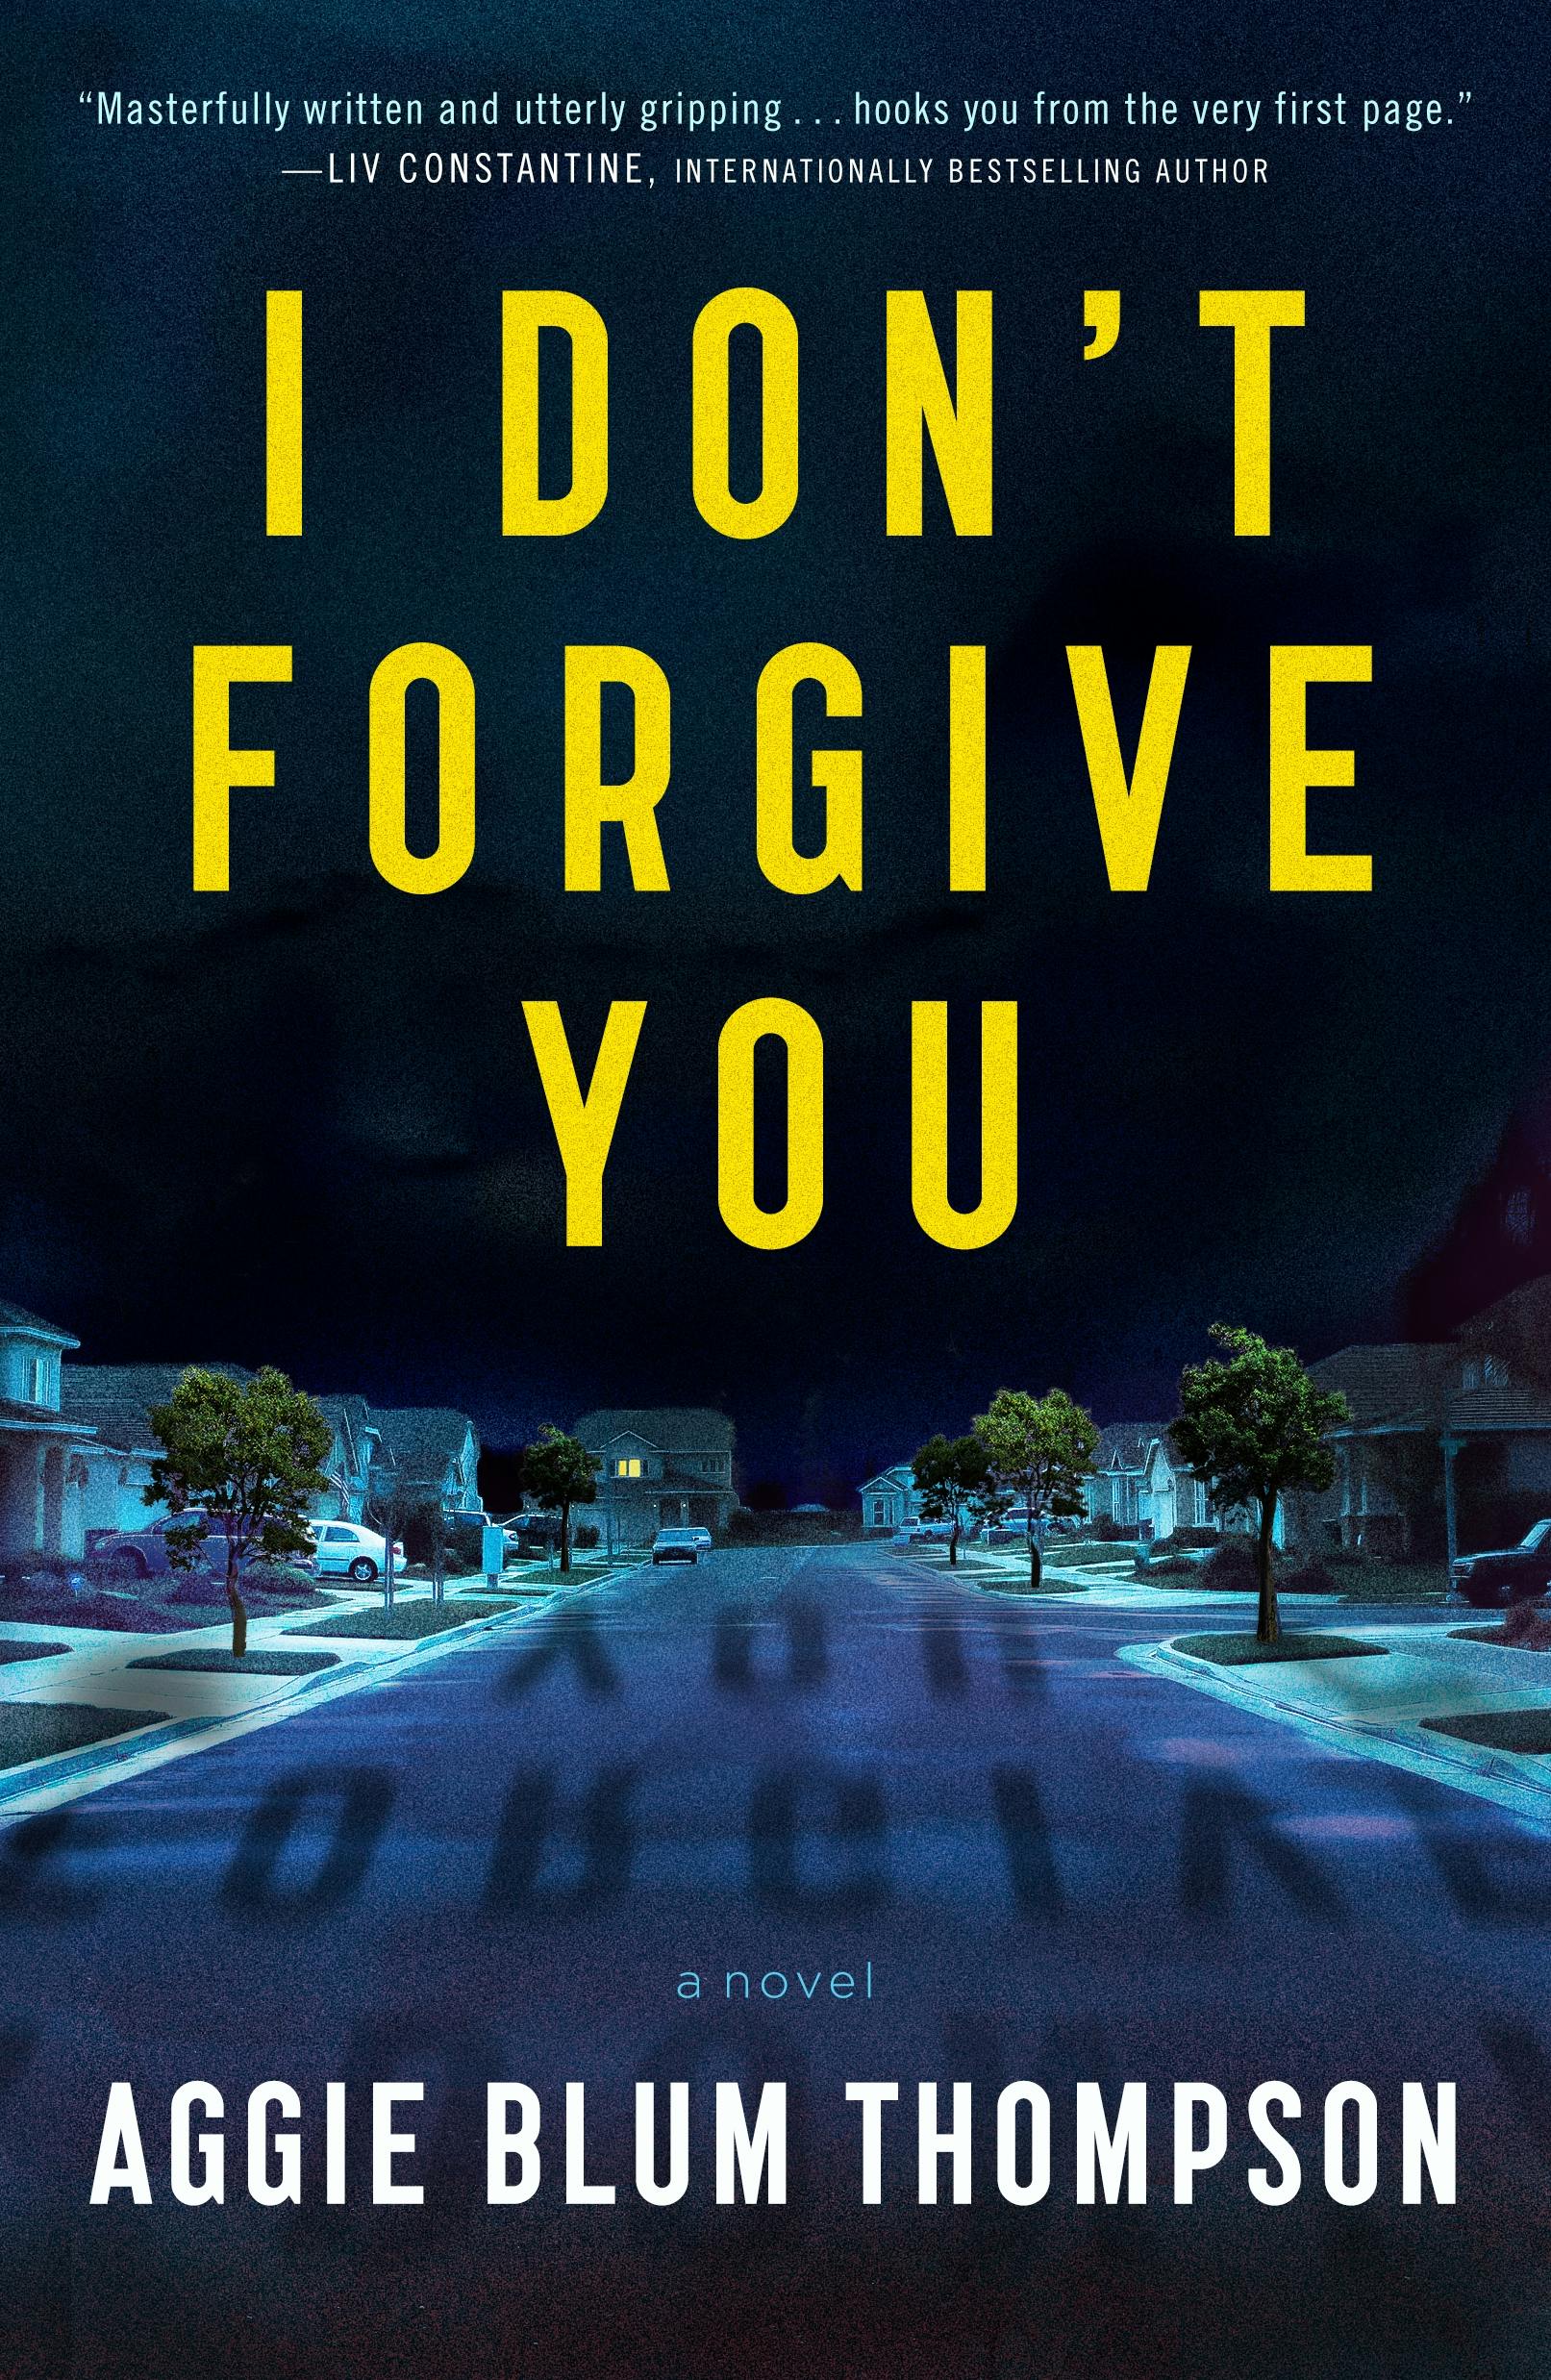 Cover for the book titled as: I Don't Forgive You